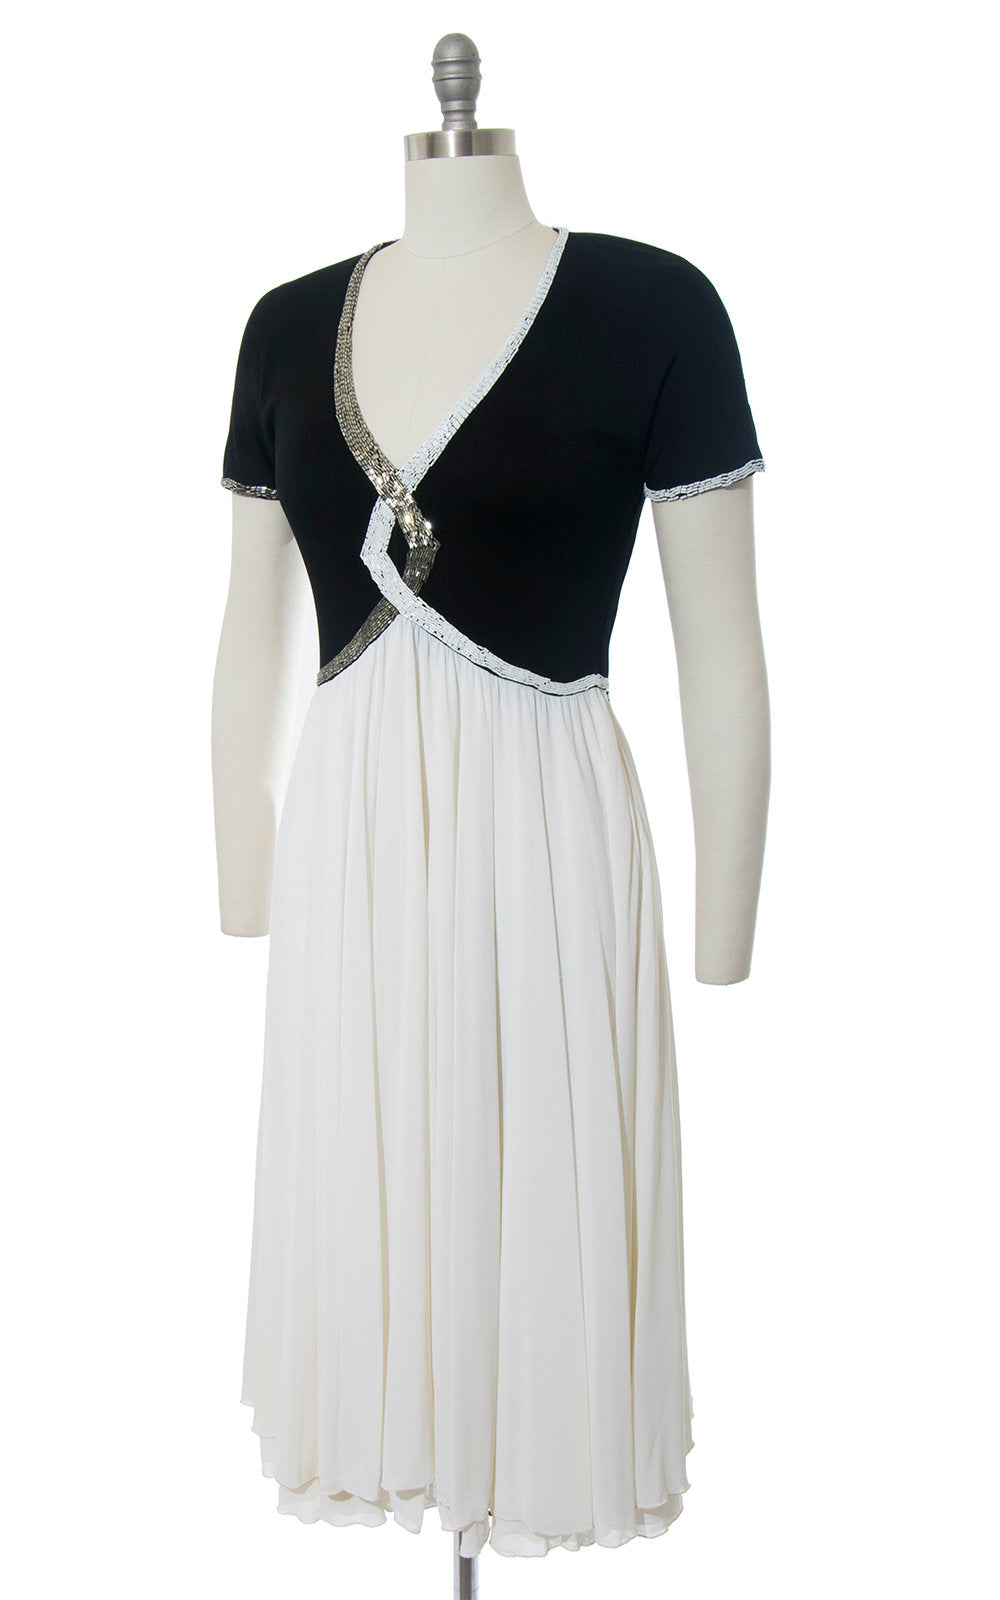 Vintage 1940s Style Dress | Beaded Jersey Knit Evening Gown Color Block Black White Party Dress (medium)